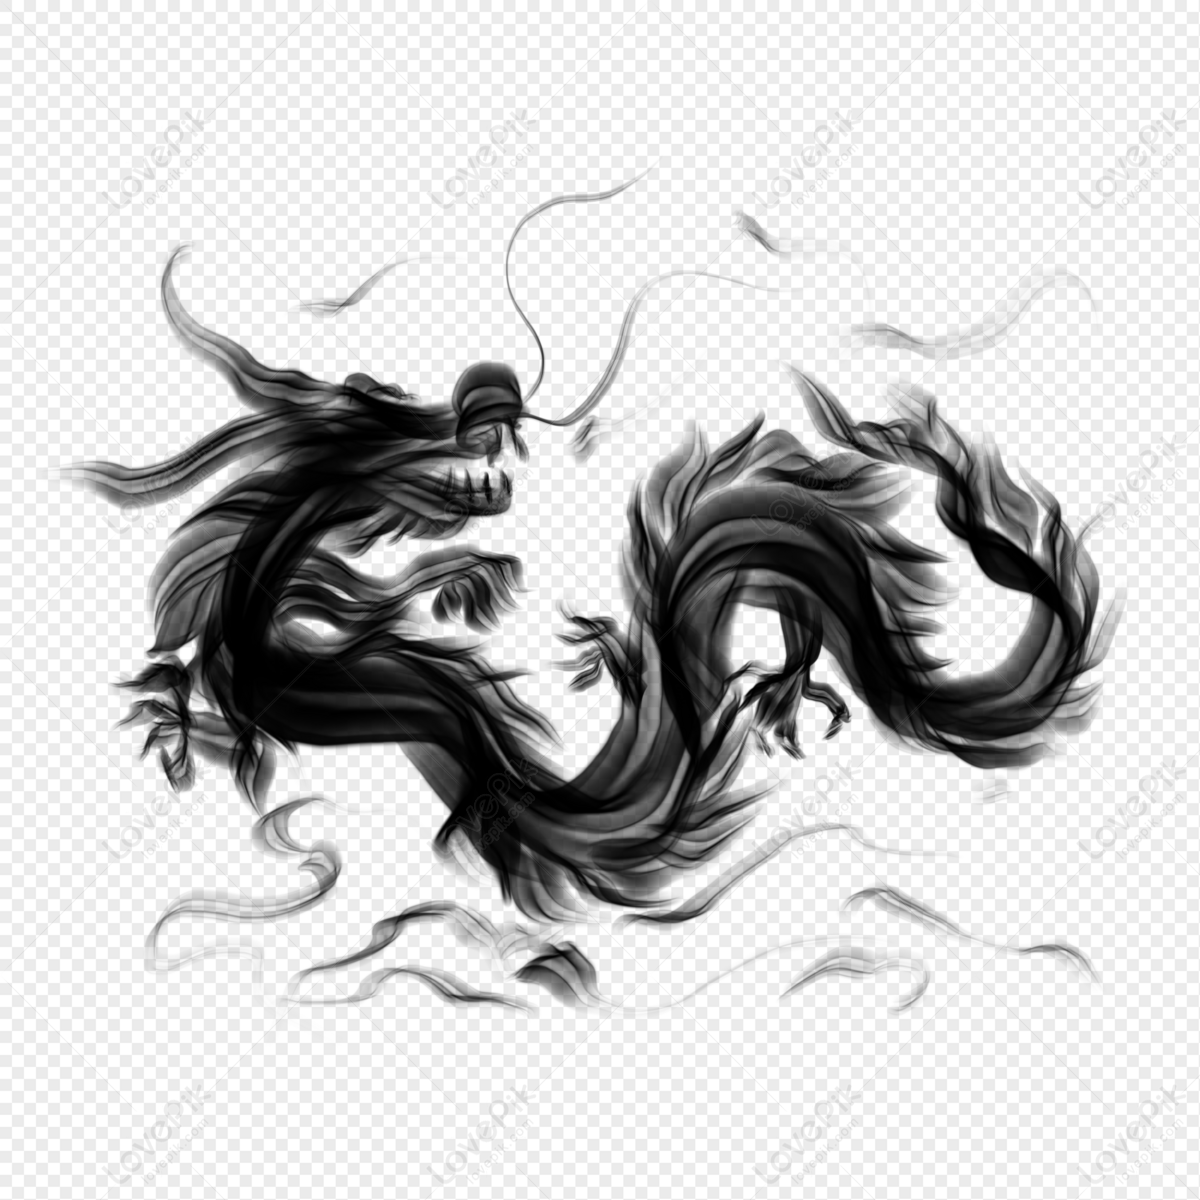 Rồng mực đen: Be mesmerized by the striking contrast of our black ink dragon image. The powerful yet graceful creature is sure to leave a lasting impression.